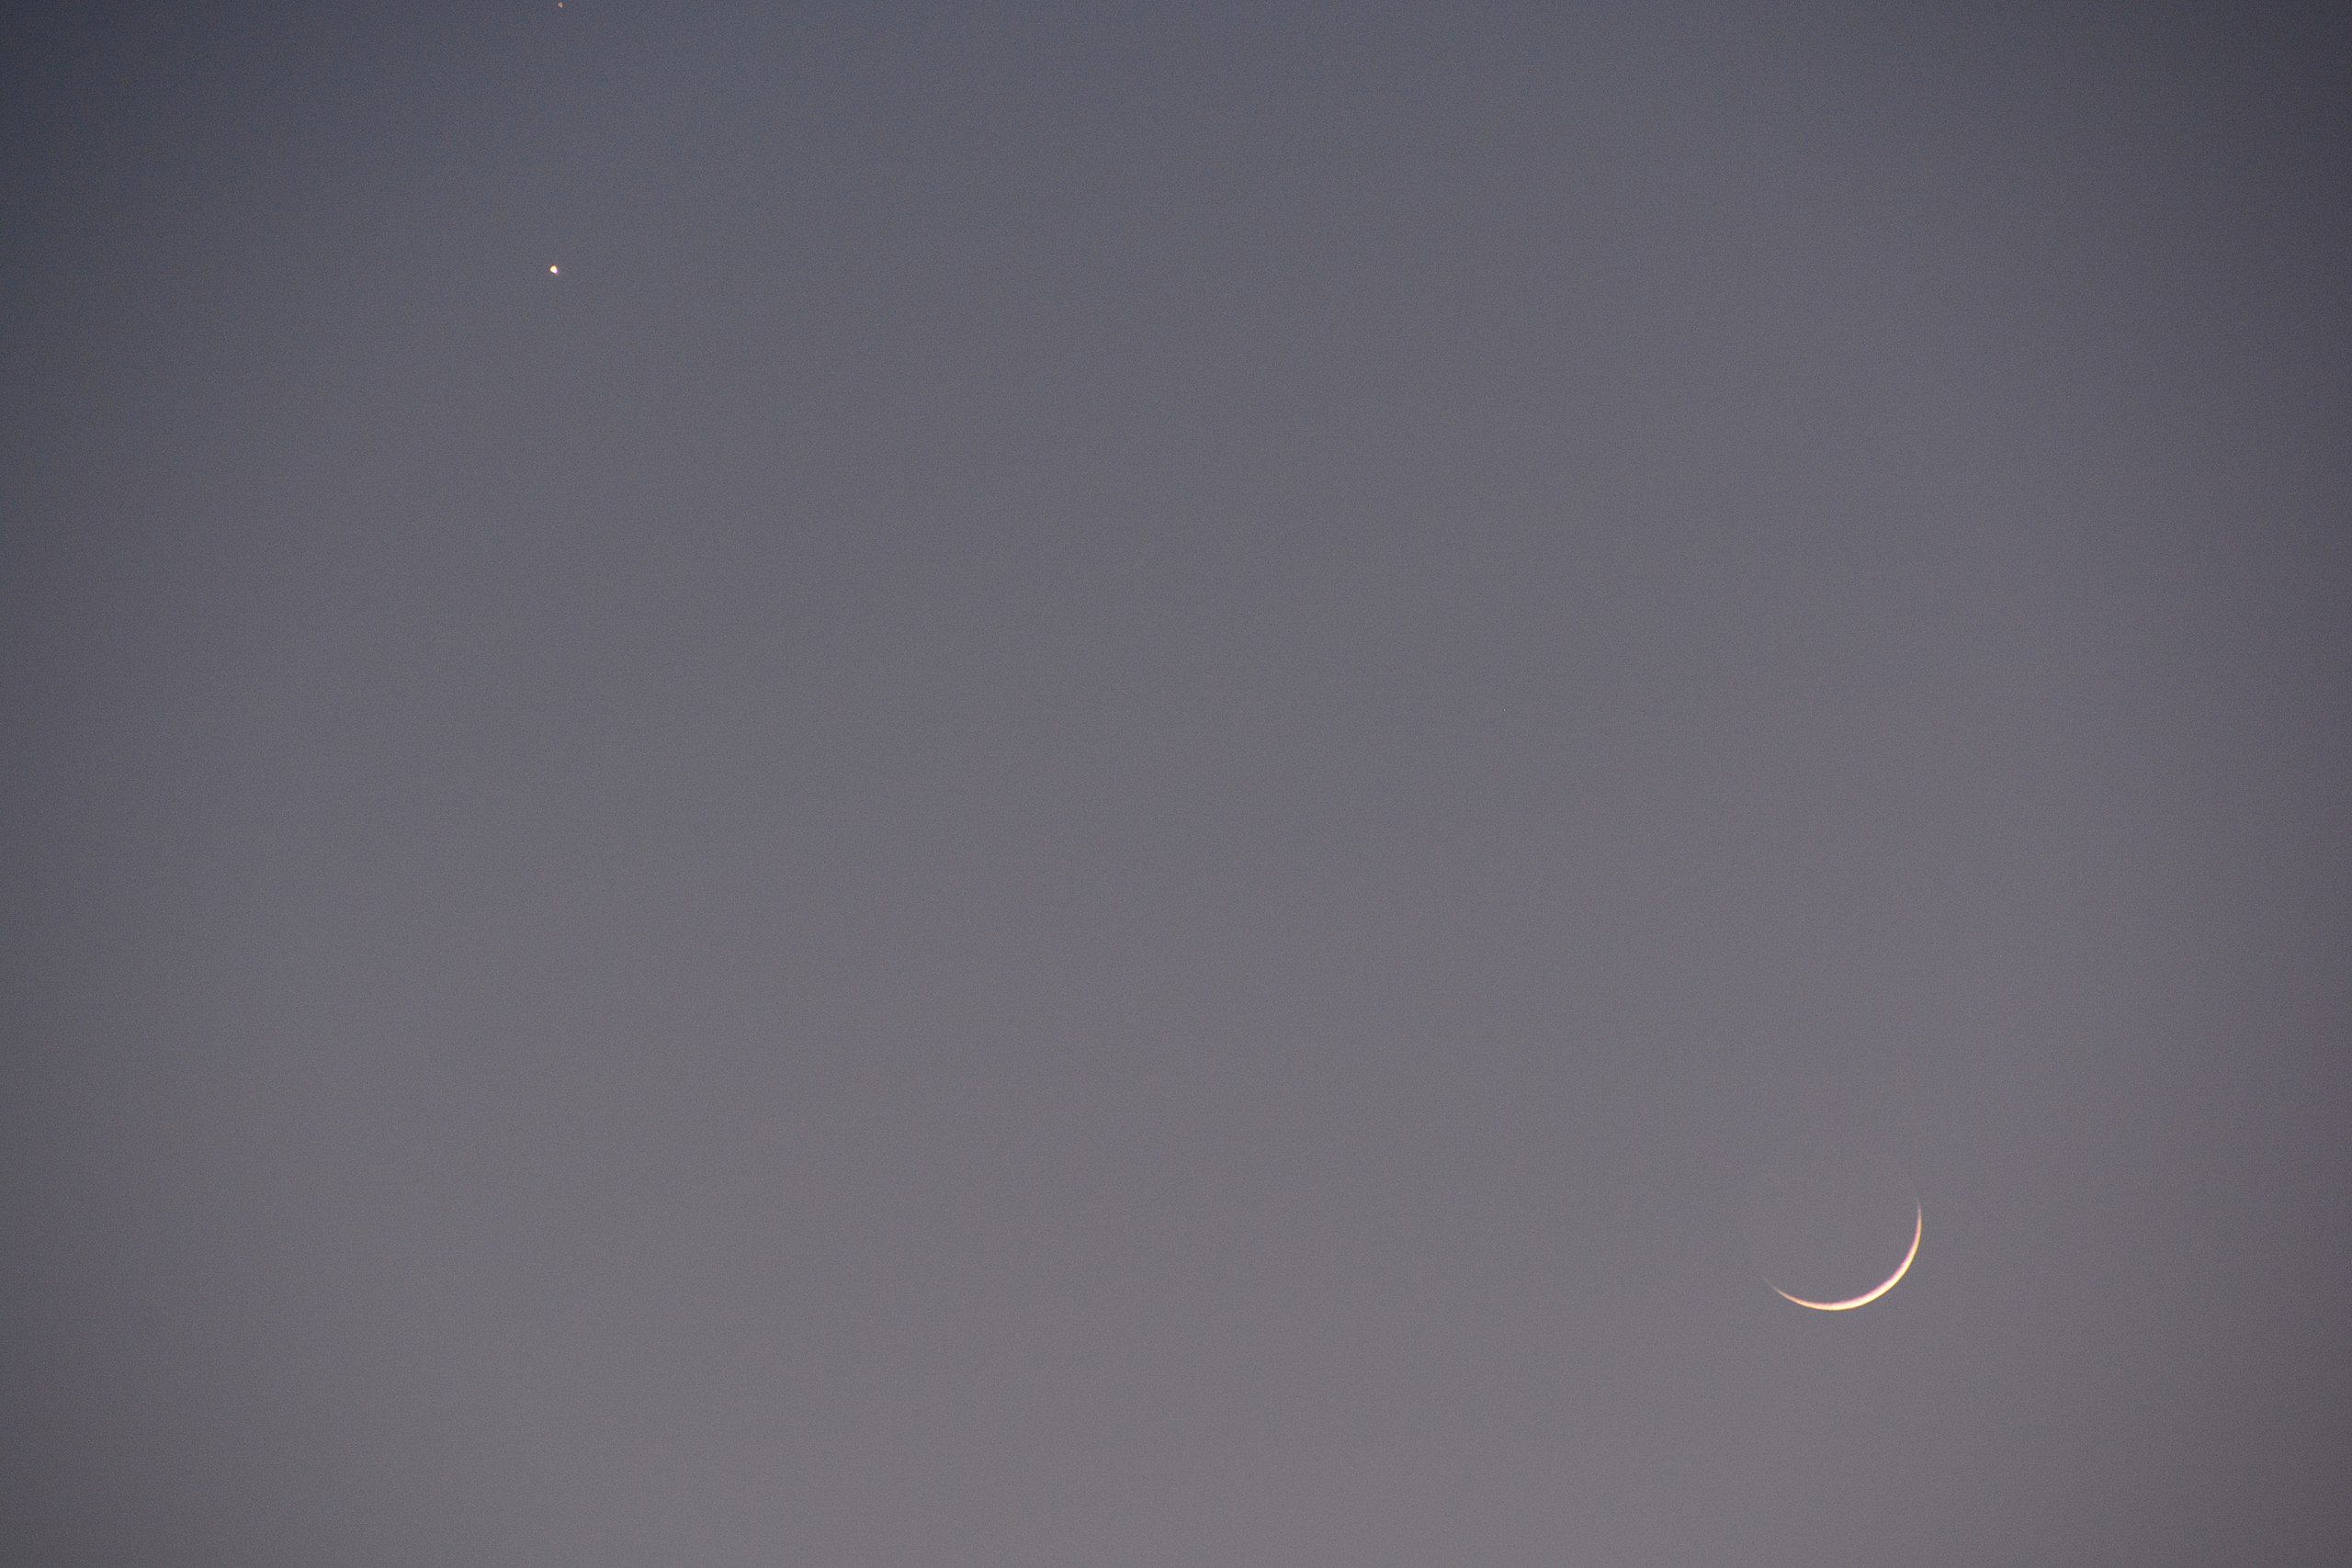 File:Waxing crescent moon and evening star 3.JPG - Wikimedia Commons